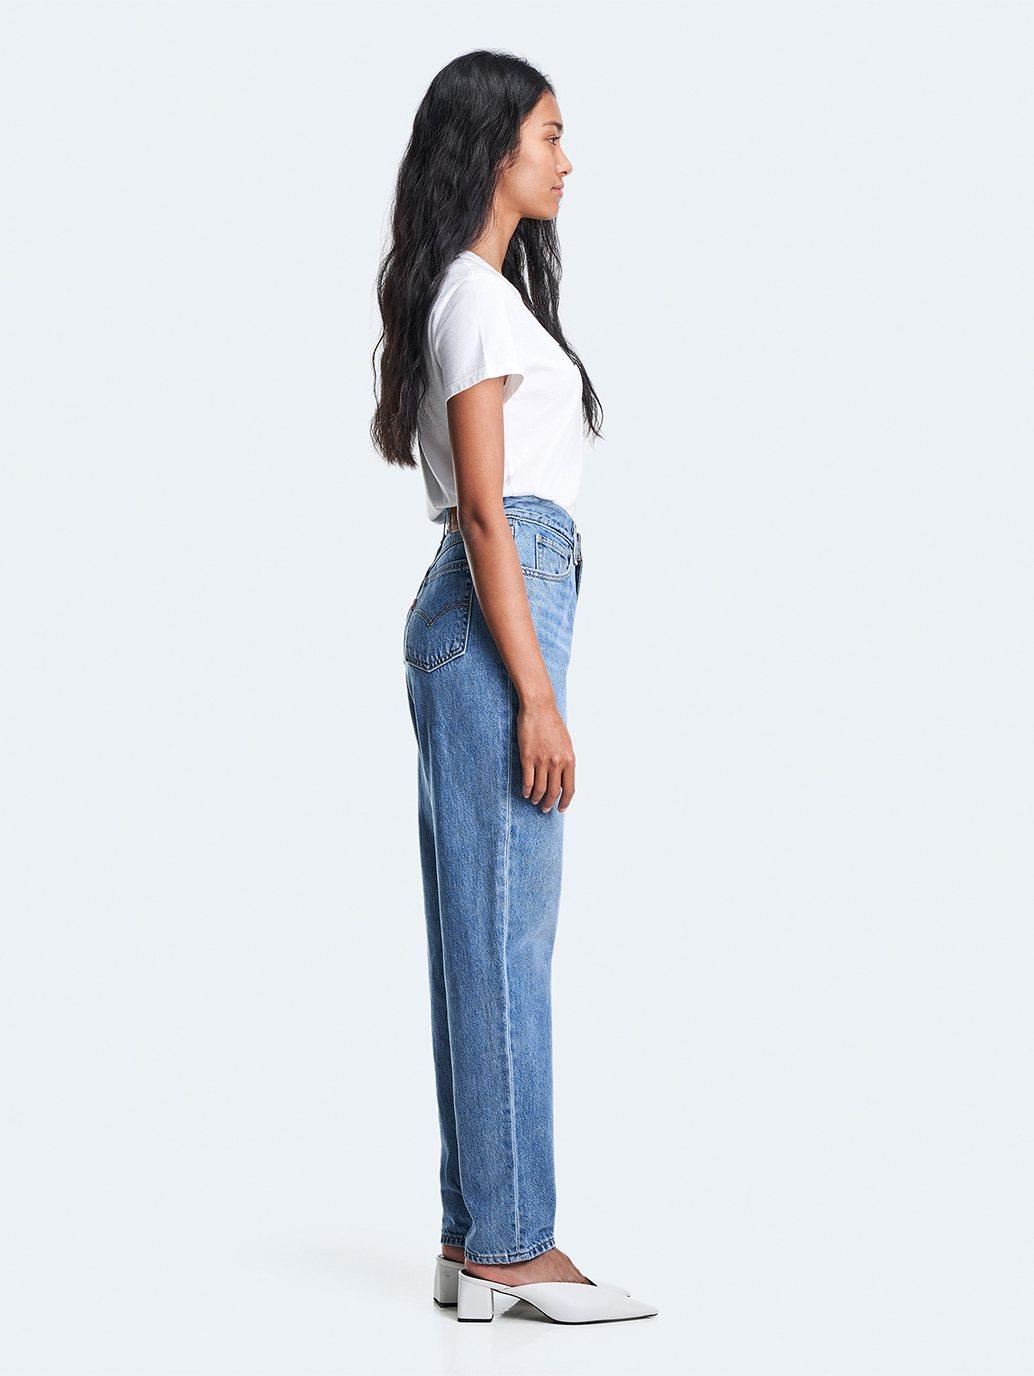 levis singapore womens 80s mom jeans A35060002 03 Side